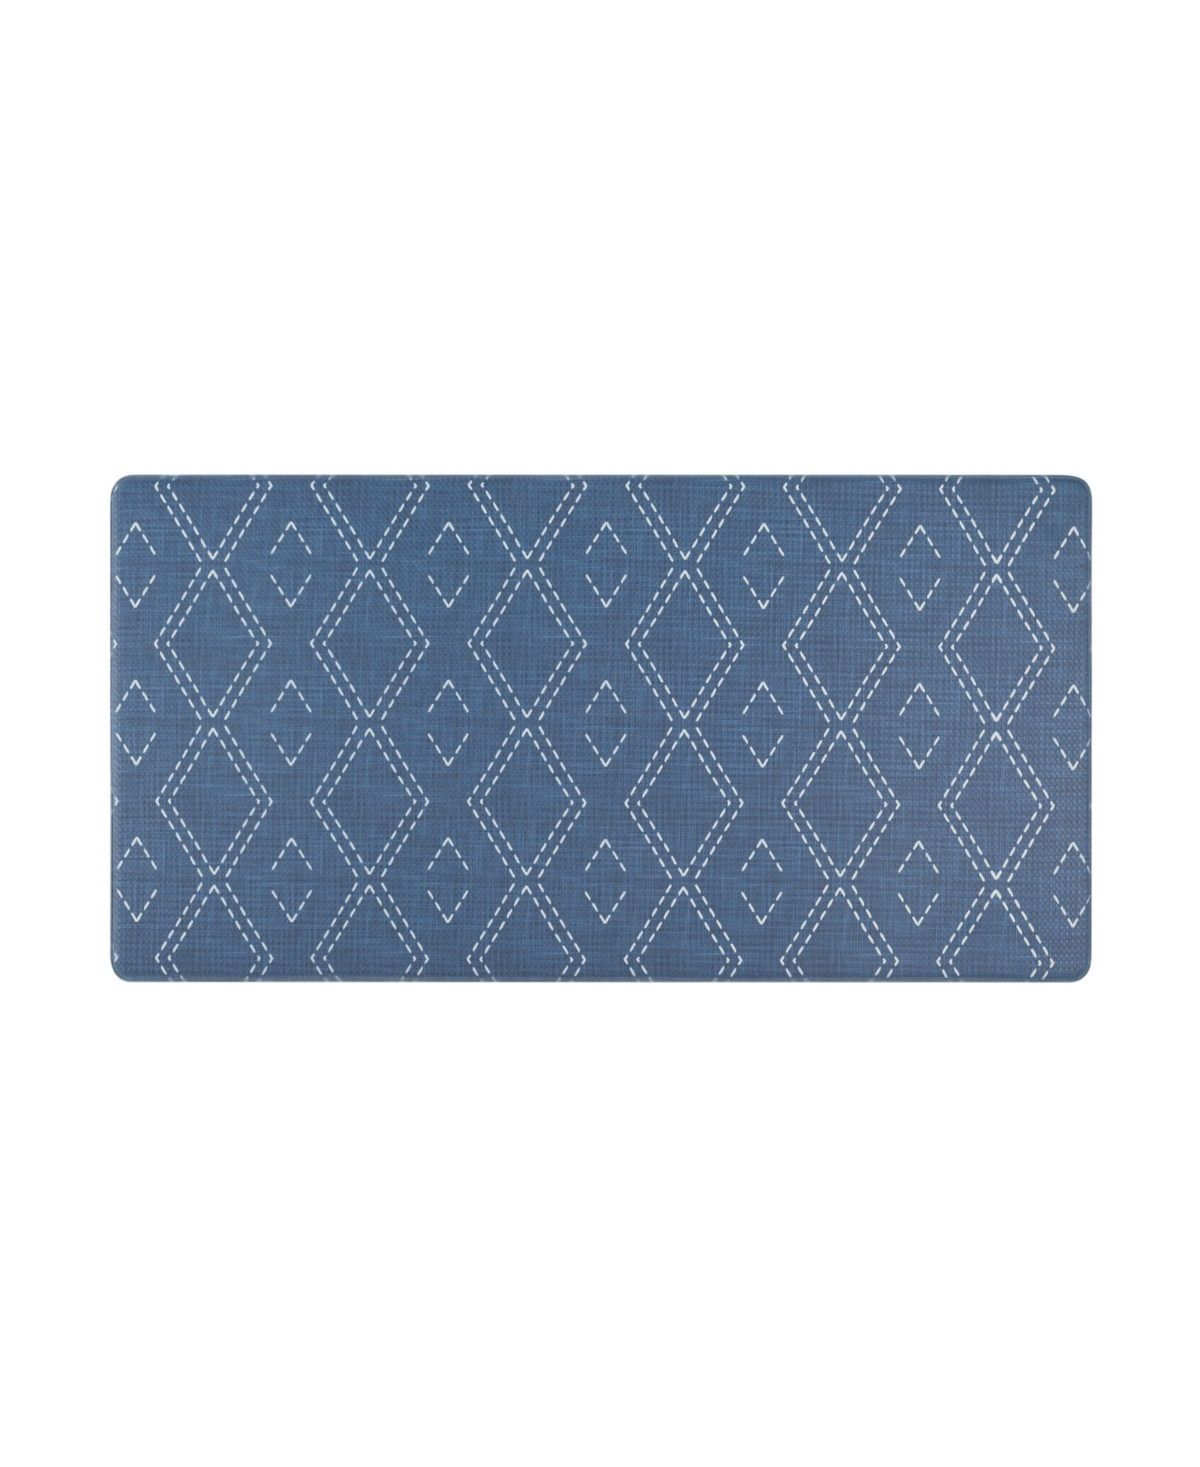 LUCKY BRAND SAN LUIS PRINTED ANTI-FATIGUE AND SKID-RESISTANT WELLNESS MAT, 20" X 39"